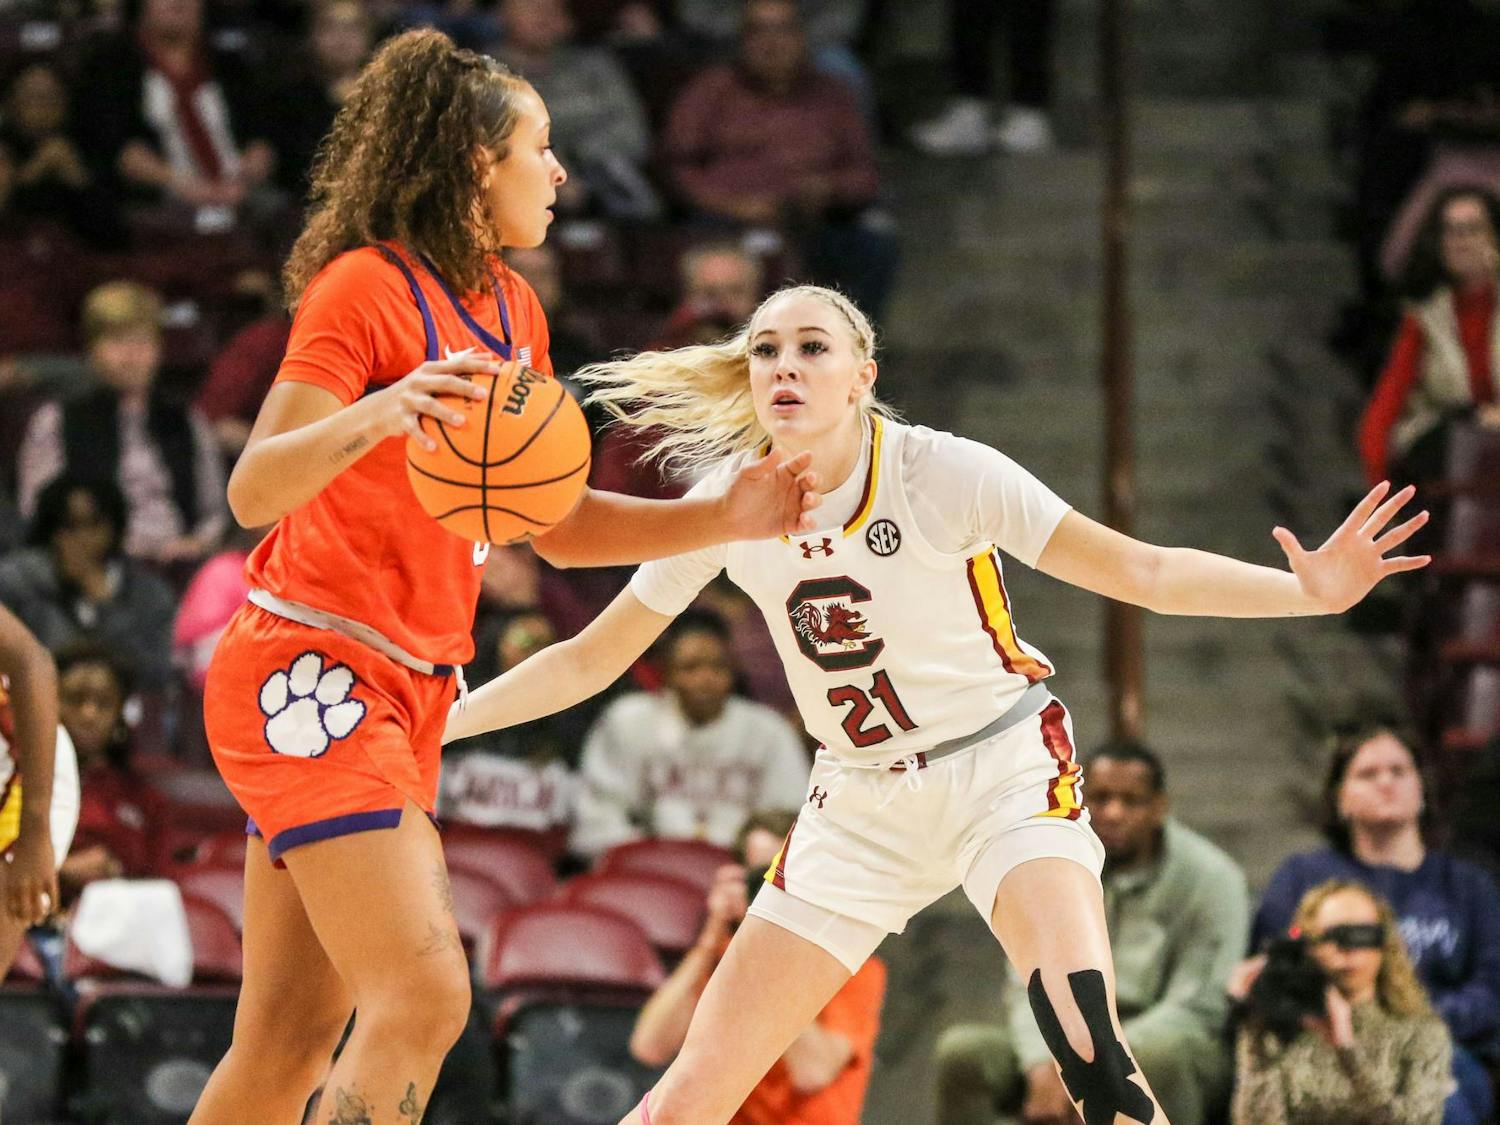 Sophomore forward Chloe Kitts plays back on defense during South Carolina’s game against Clemson at Colonial Life Arena on Nov. 16, 2023. The DME Academy alumna had one defensive rebound and one steal during the Gamecocks' 109-40 win over the Tigers.